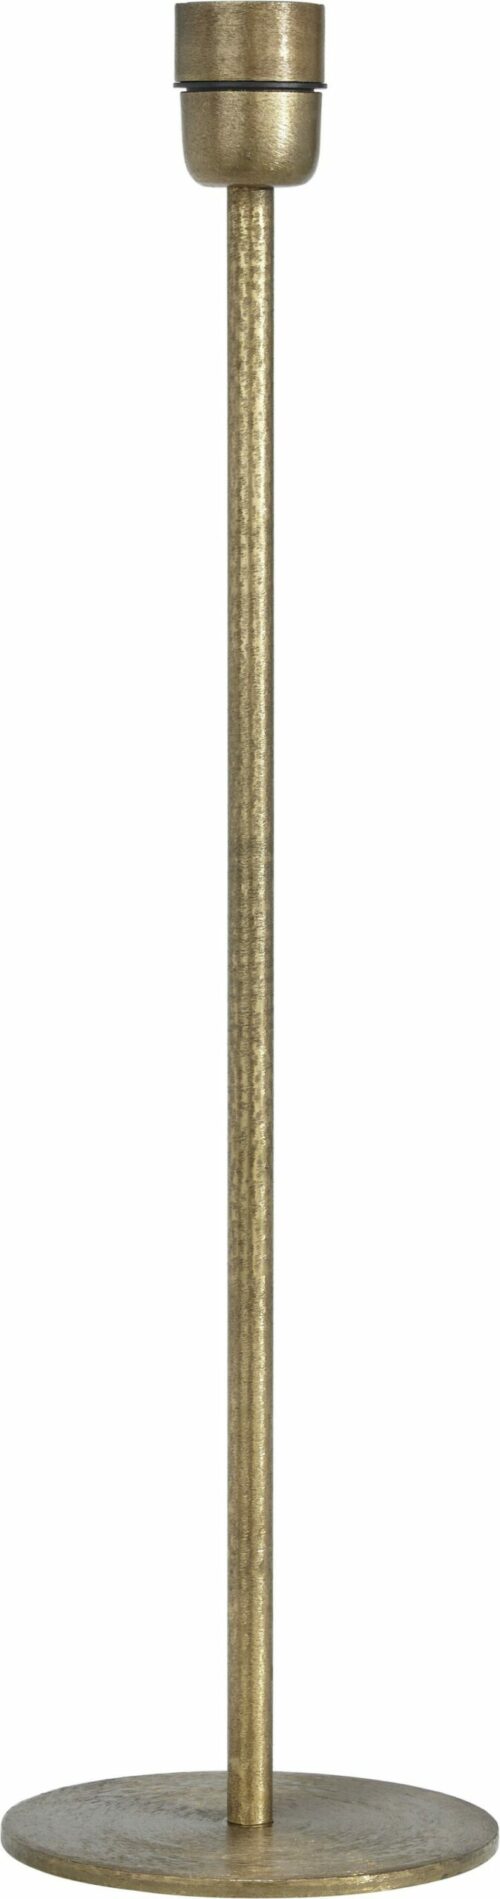 Lampenfuss Base geschlagenes Gold 55 cm scaled